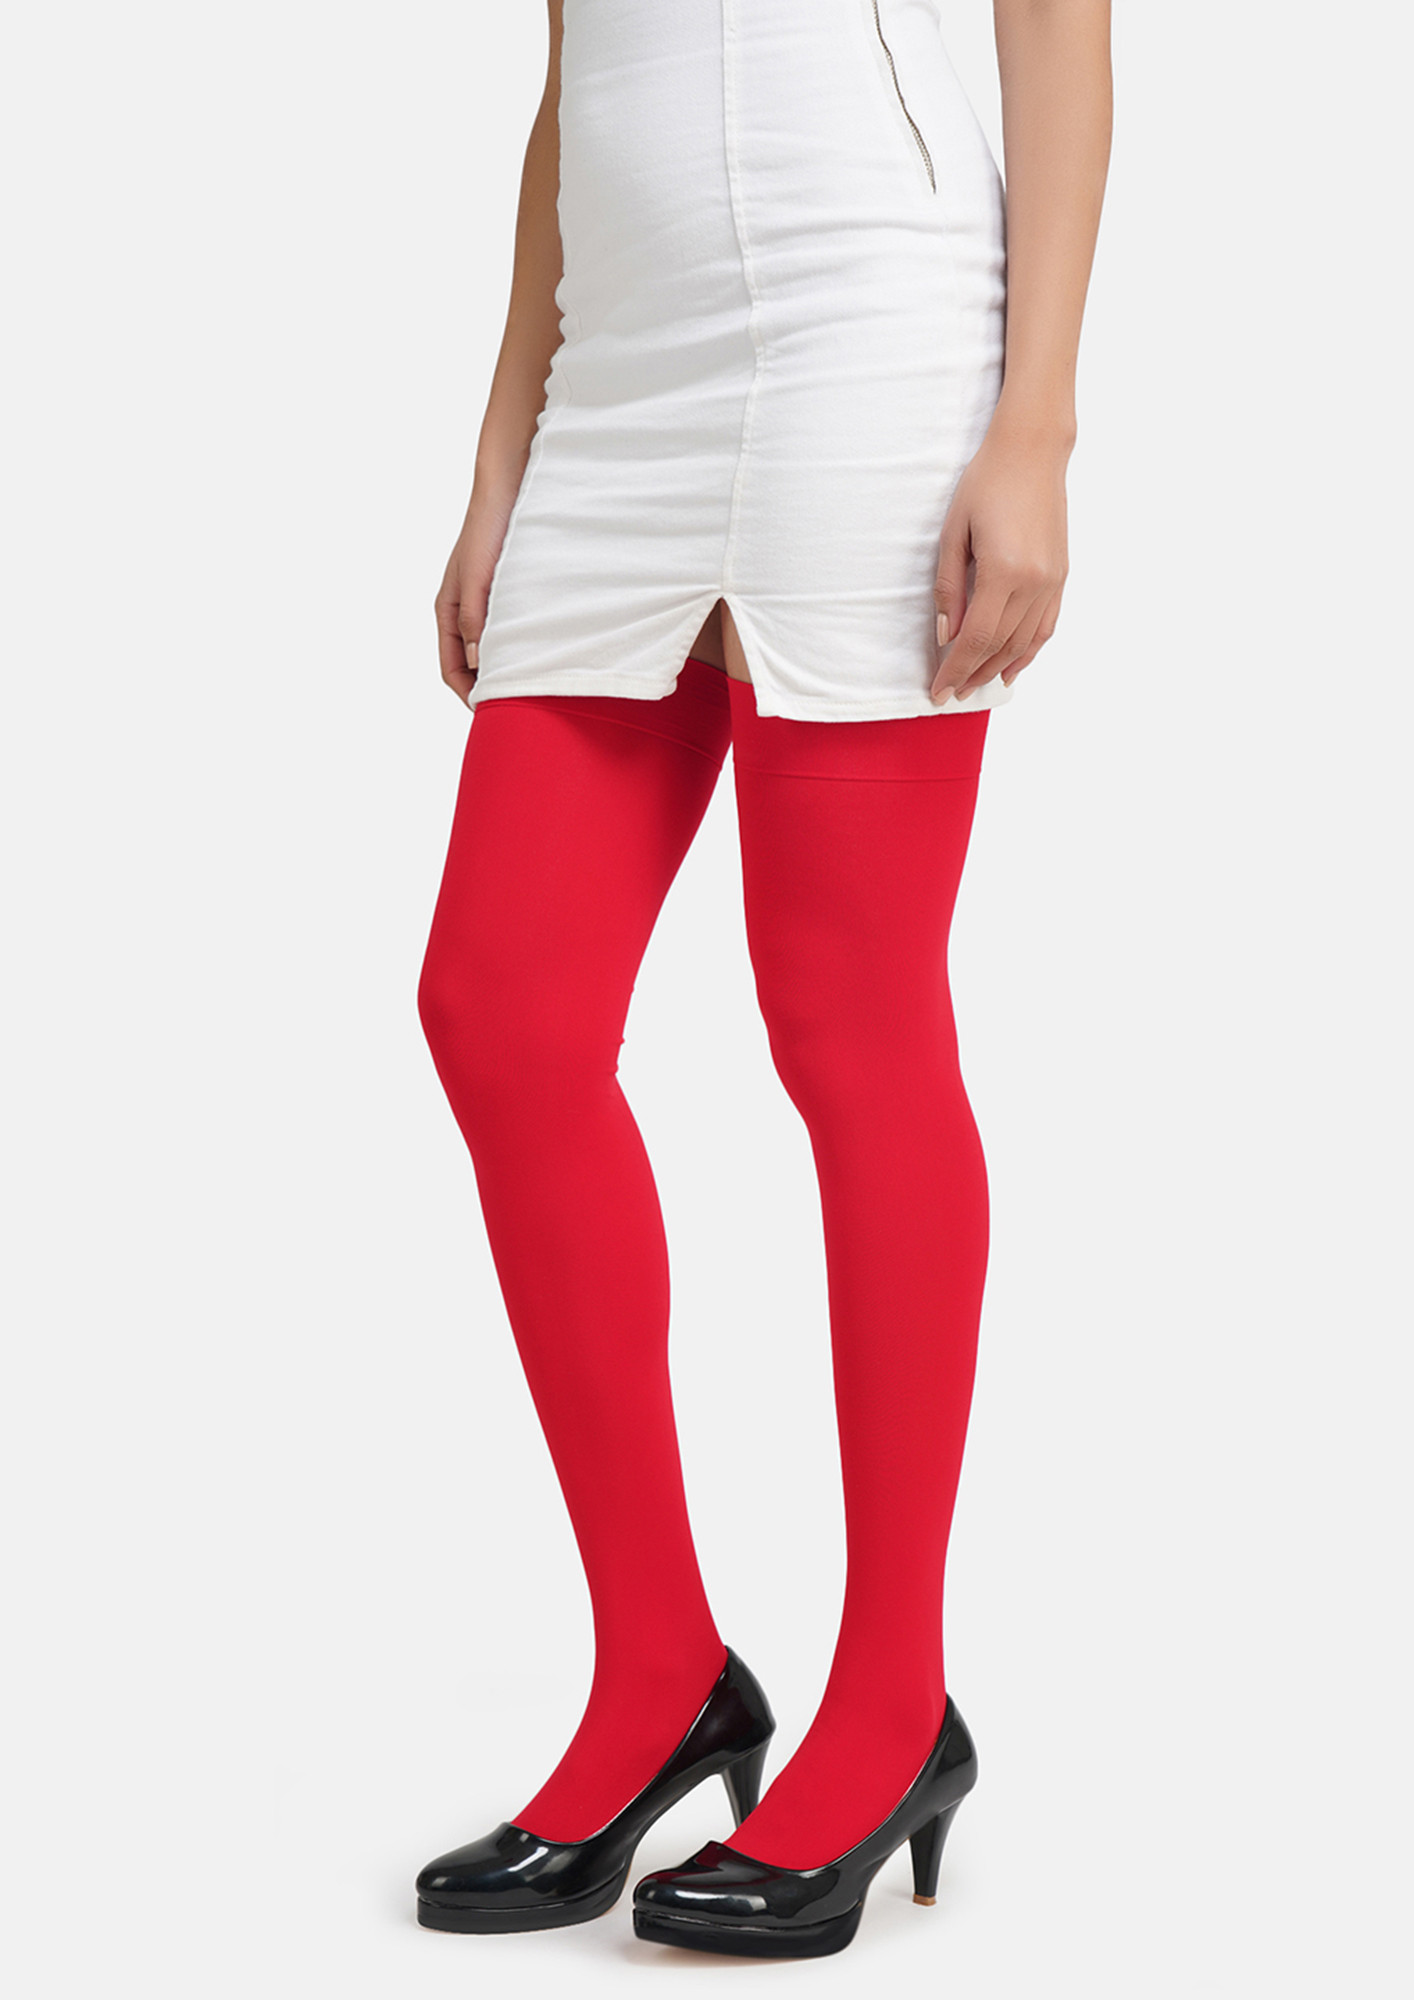 Buy N2S NEXT2SKIN Women's Thigh High Opaque Stockings (Red) for